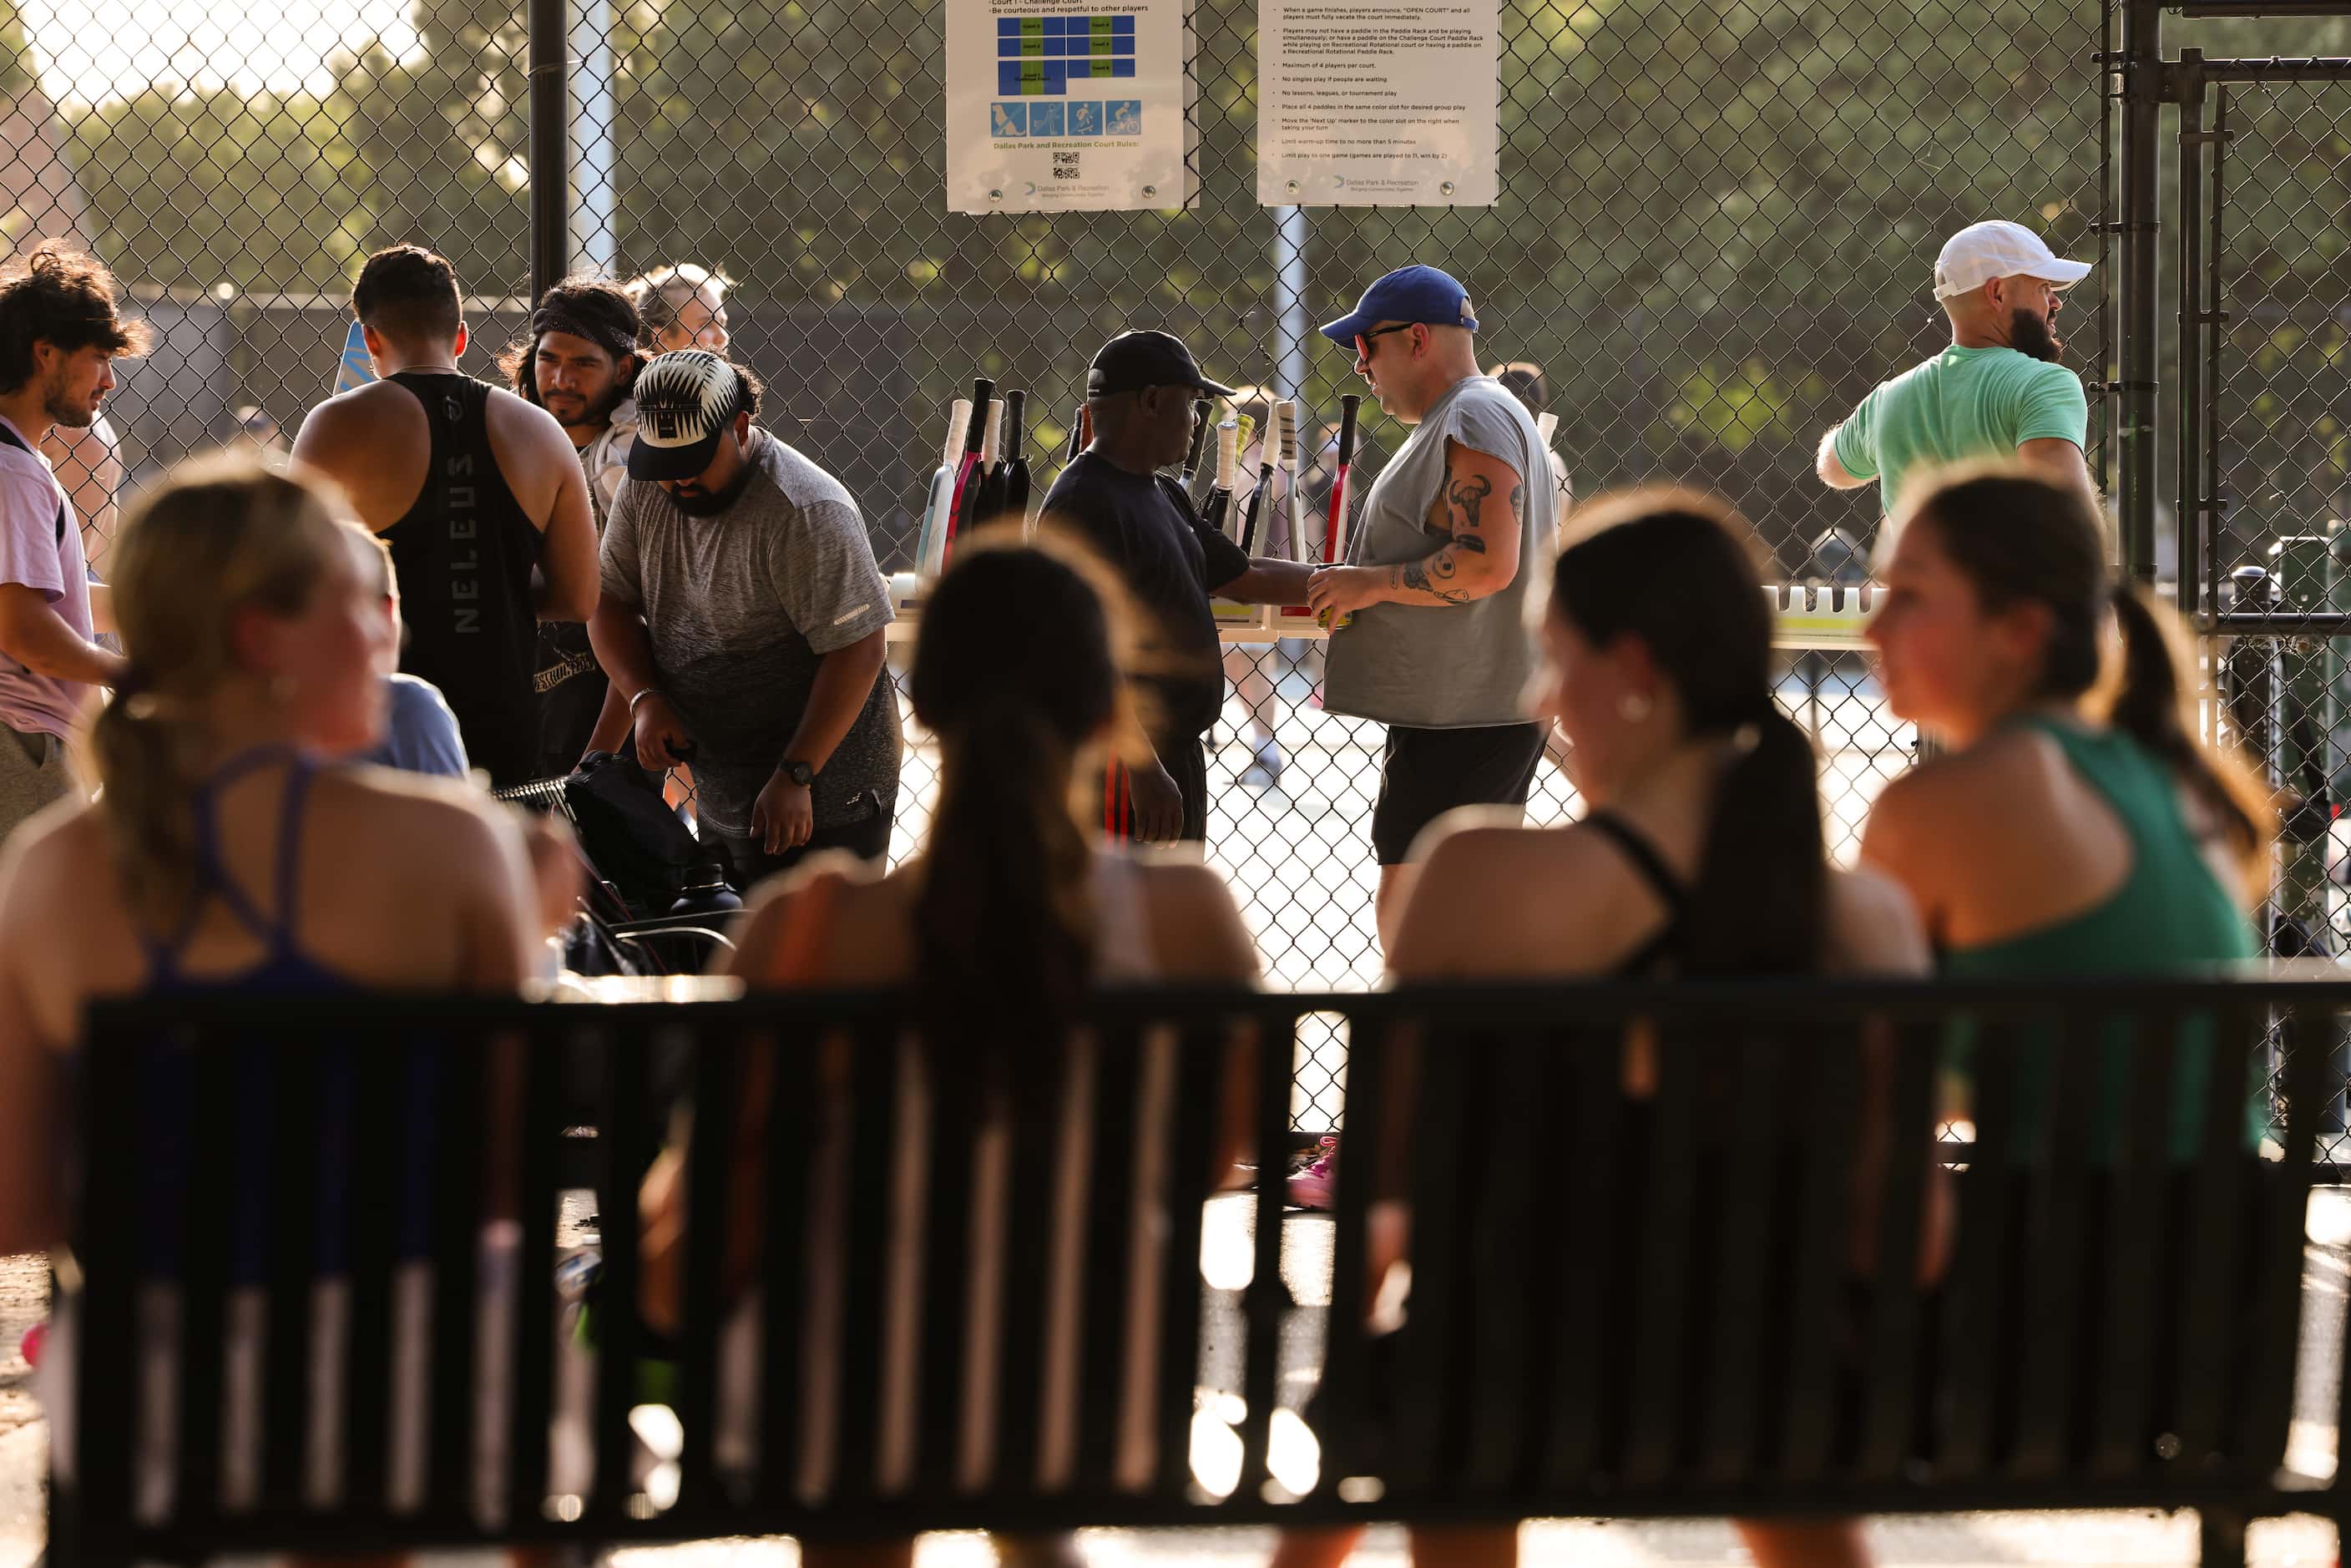 Players wait for courts to play pickleball at Cole Park in Dallas.
